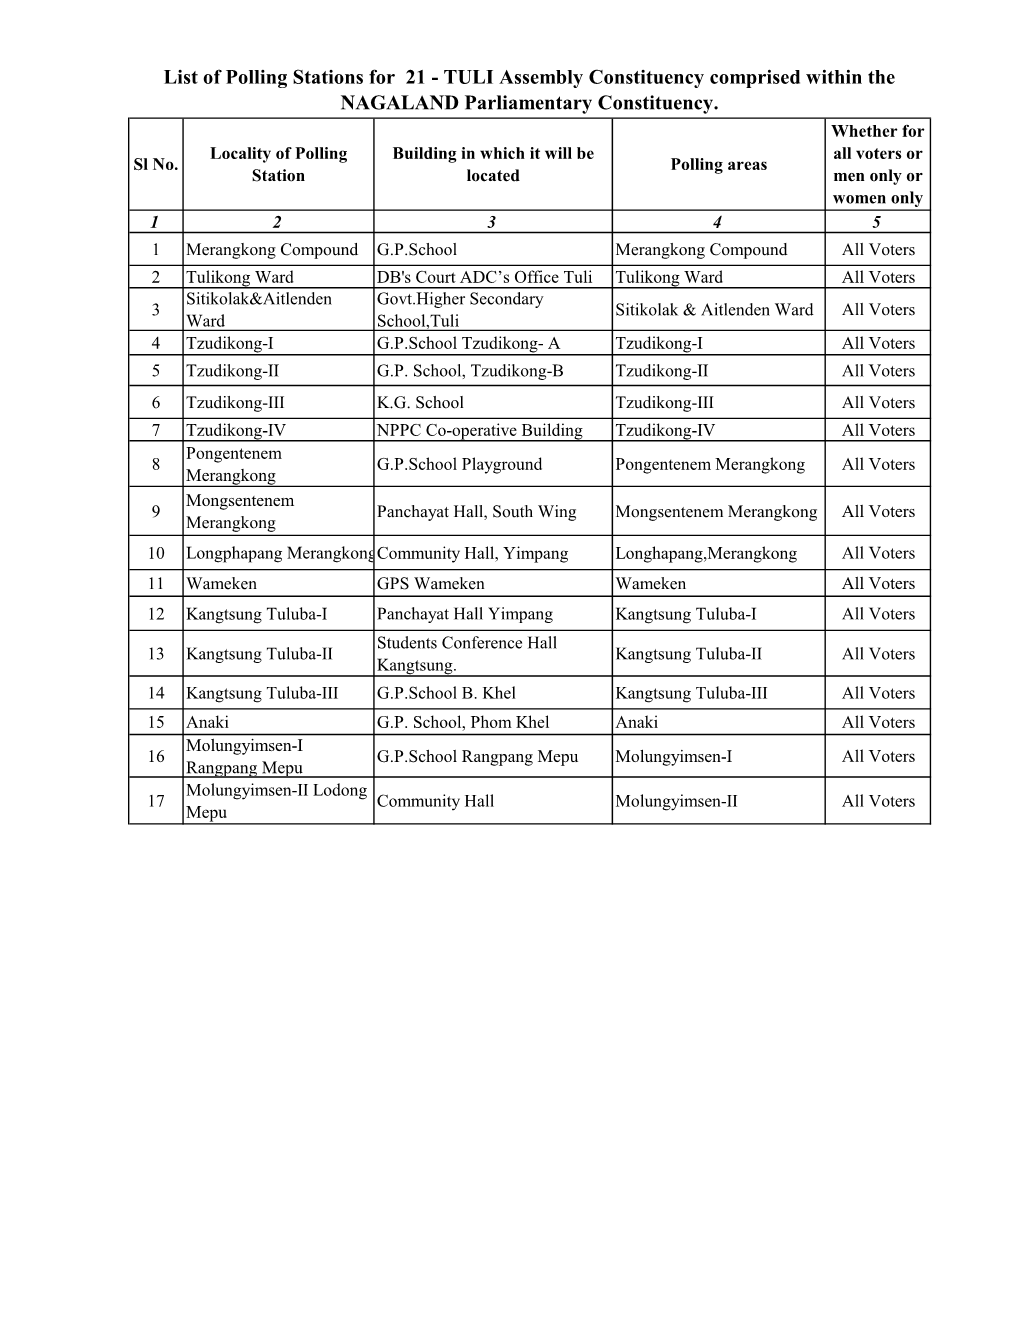 List of Polling Stations for 21 - TULI Assembly Constituency Comprised Within the NAGALAND Parliamentary Constituency